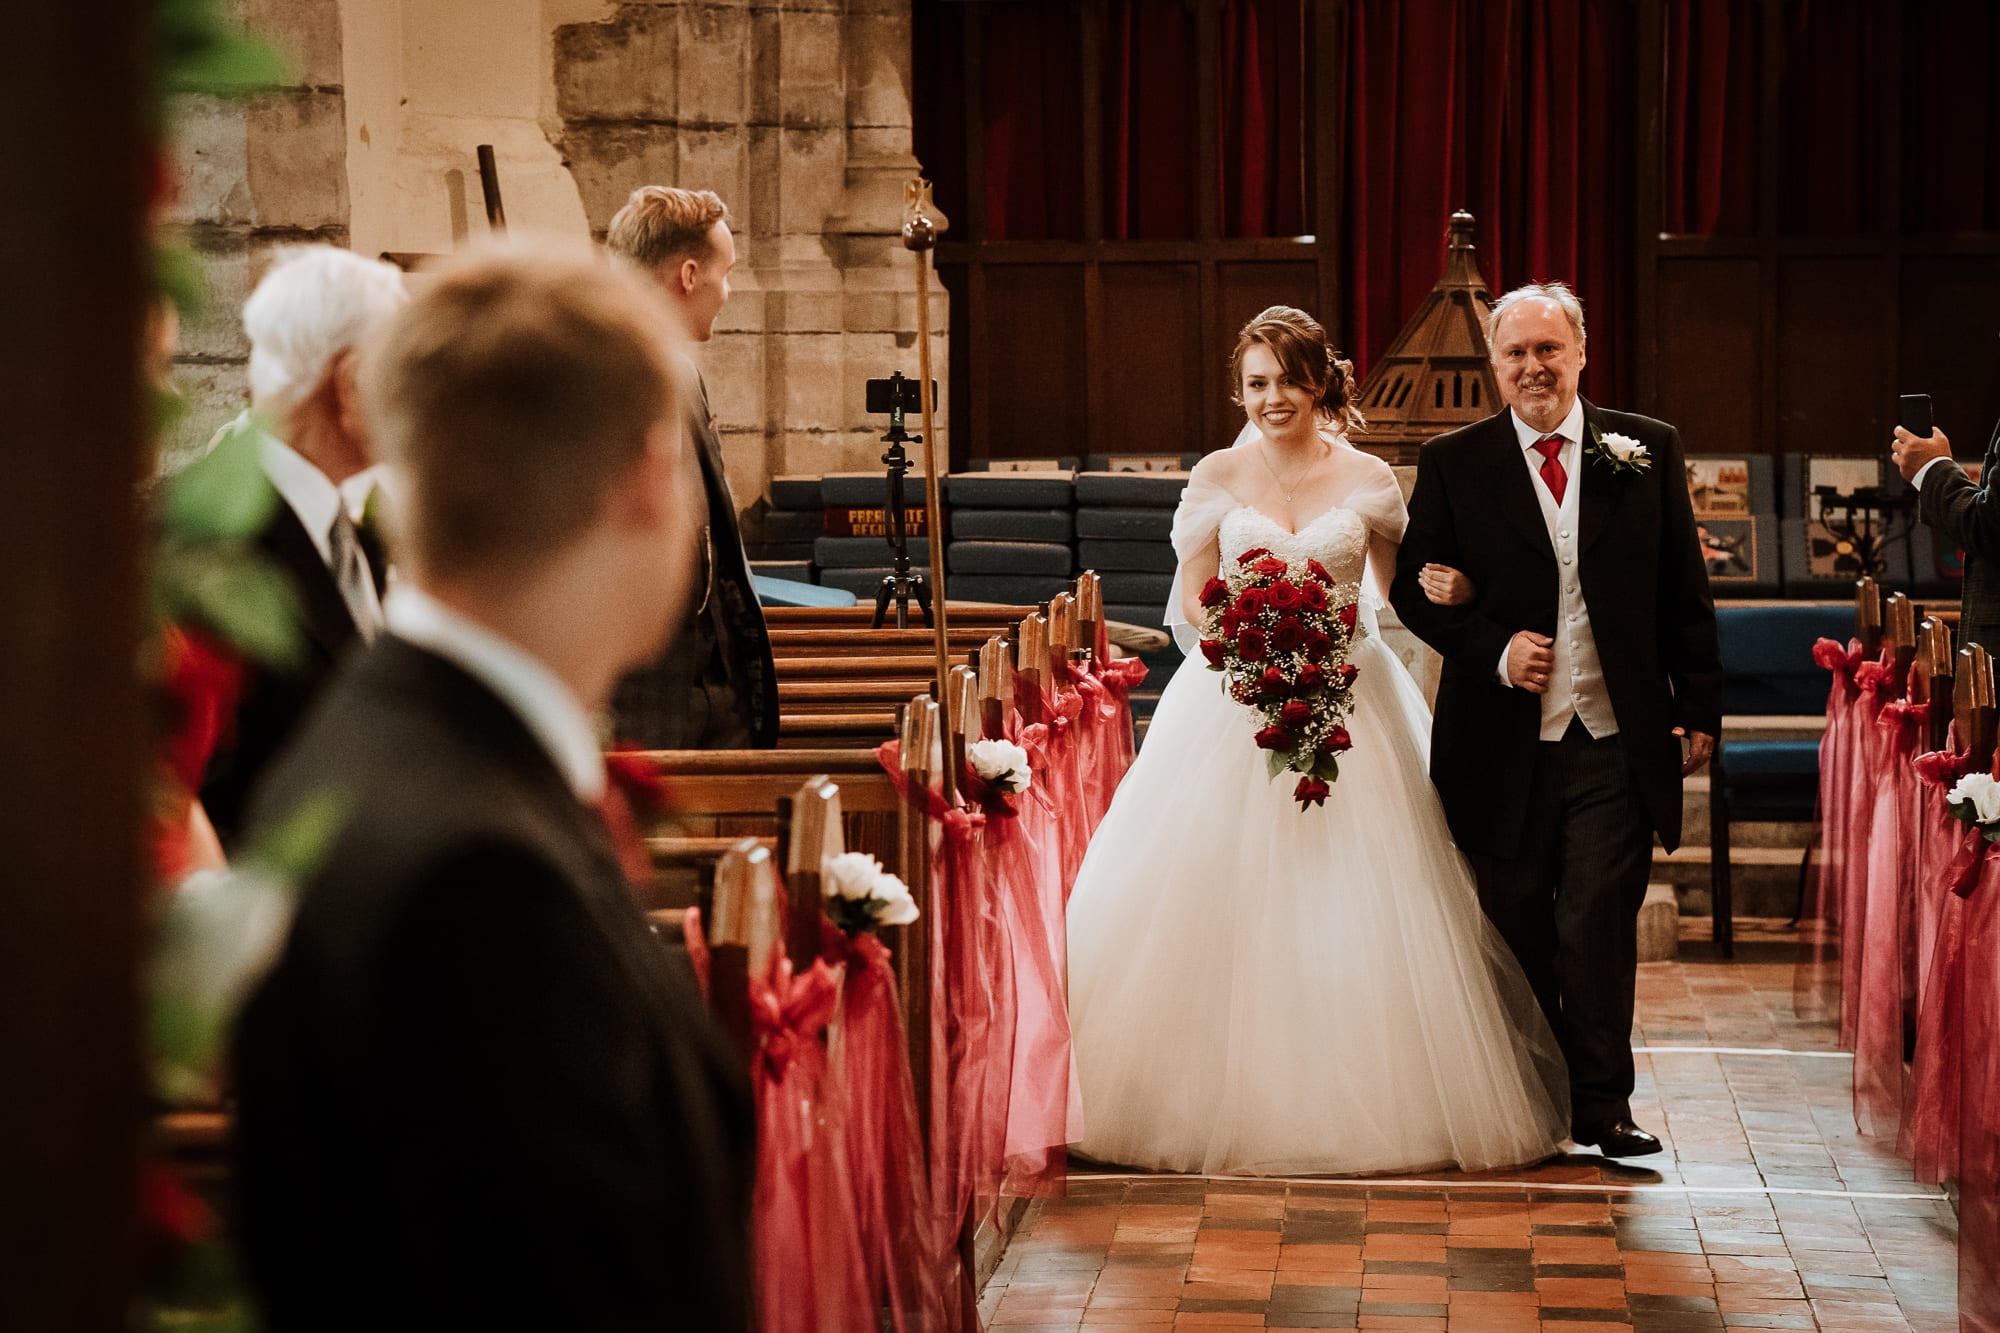 Groom looking at his Bride for the first time as she is walked down the aisle by her father